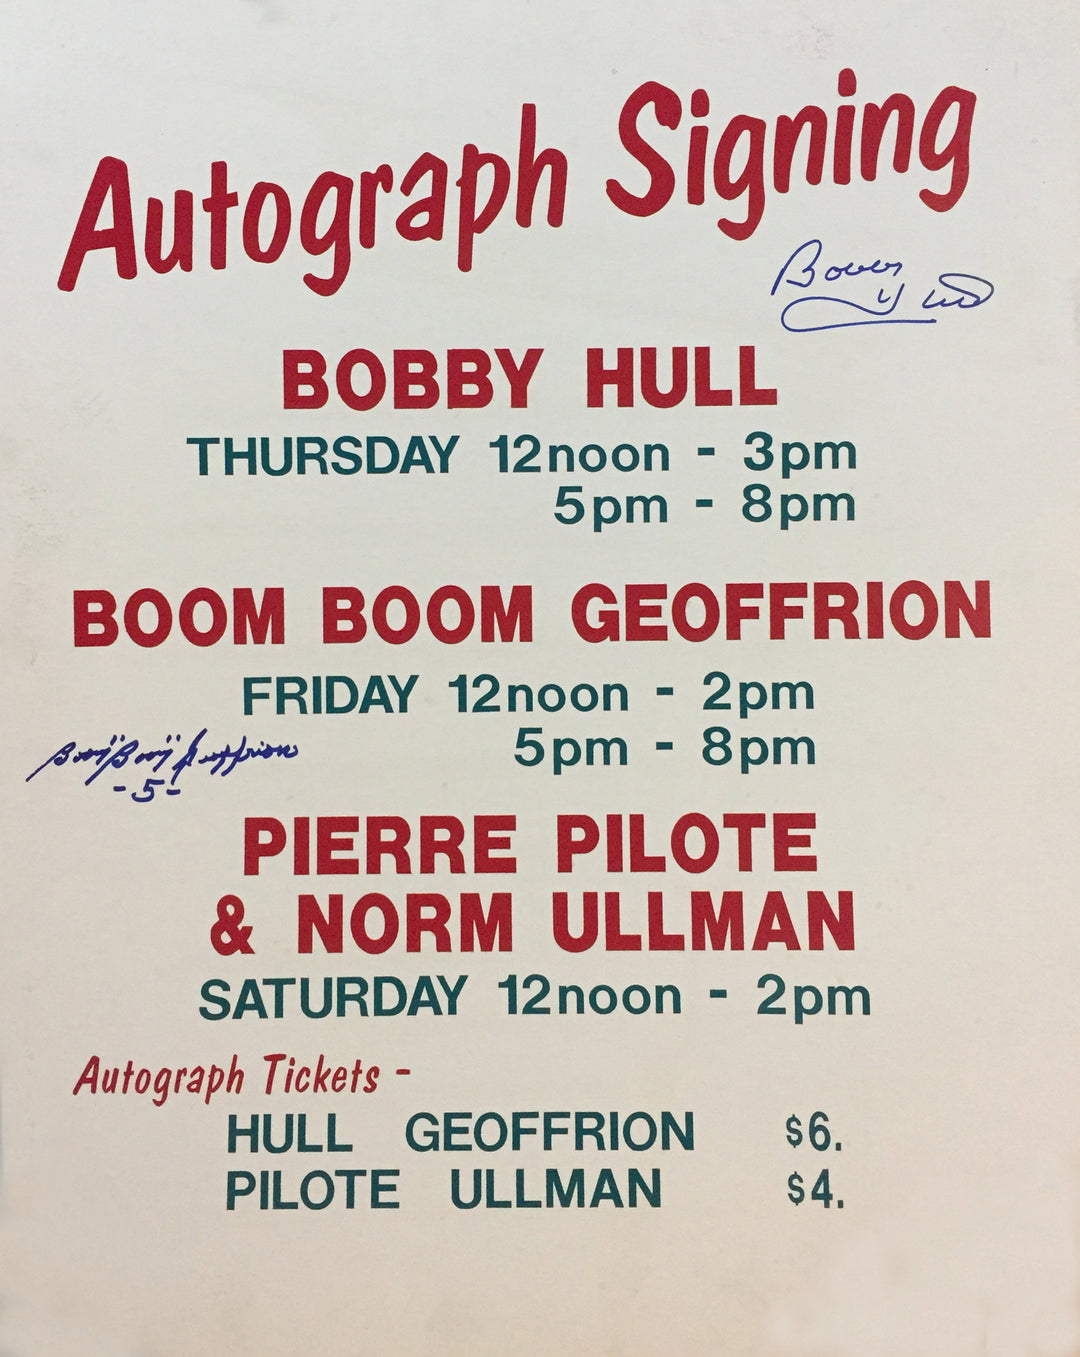 Bobby Hull, Boom Boom Geofferion Autographed Vintage Sign, Chicago Blackhawks, Montreal Canadiens, NHL, Hockey, Autographed, Signed, AAVSH31838